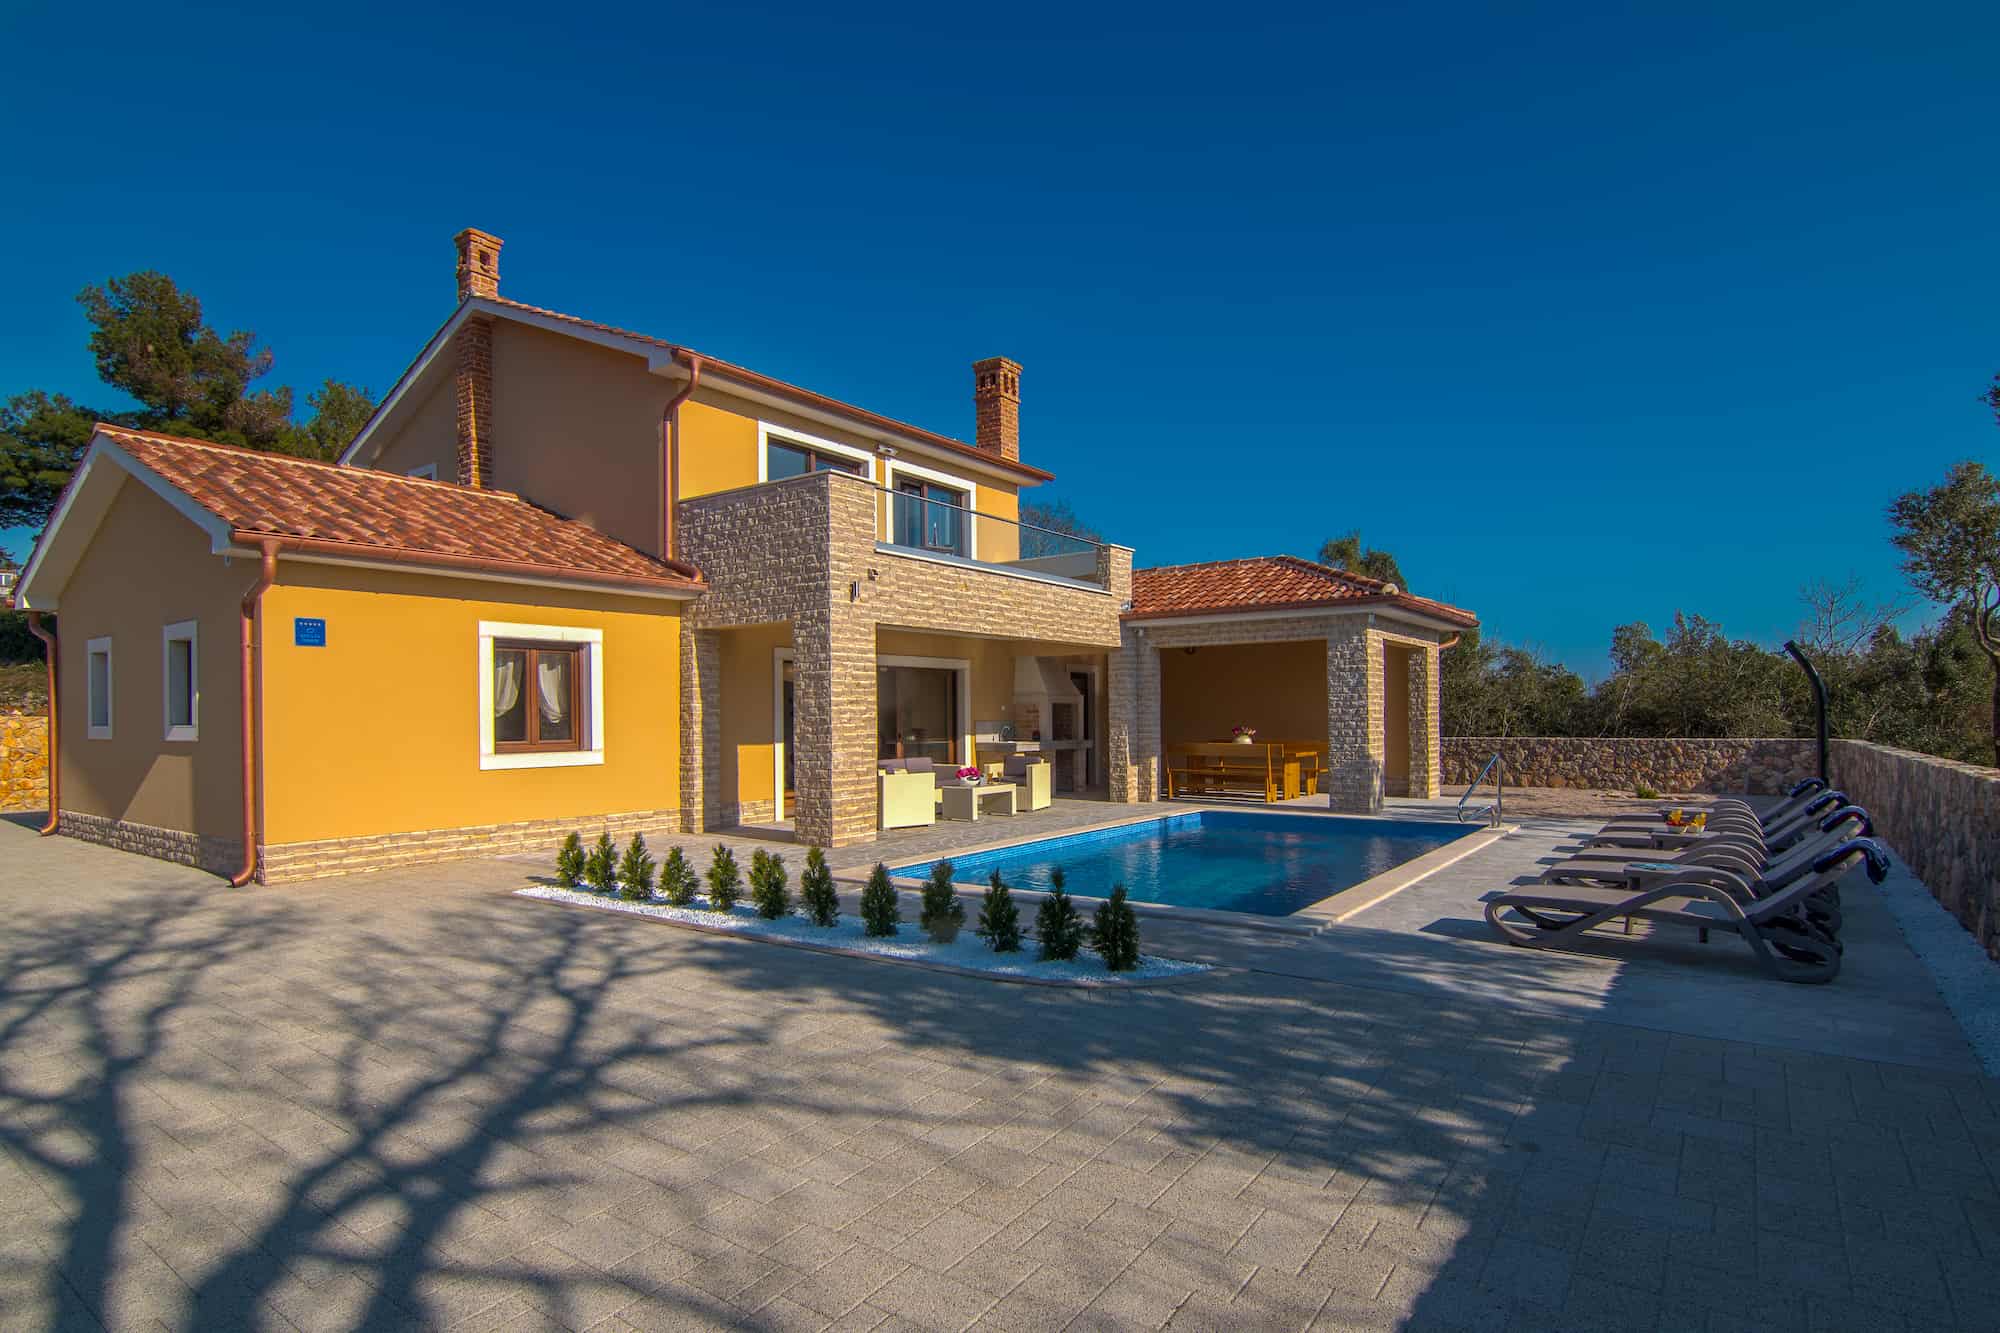 Villa with pool, 500 meters from the beach with sea view